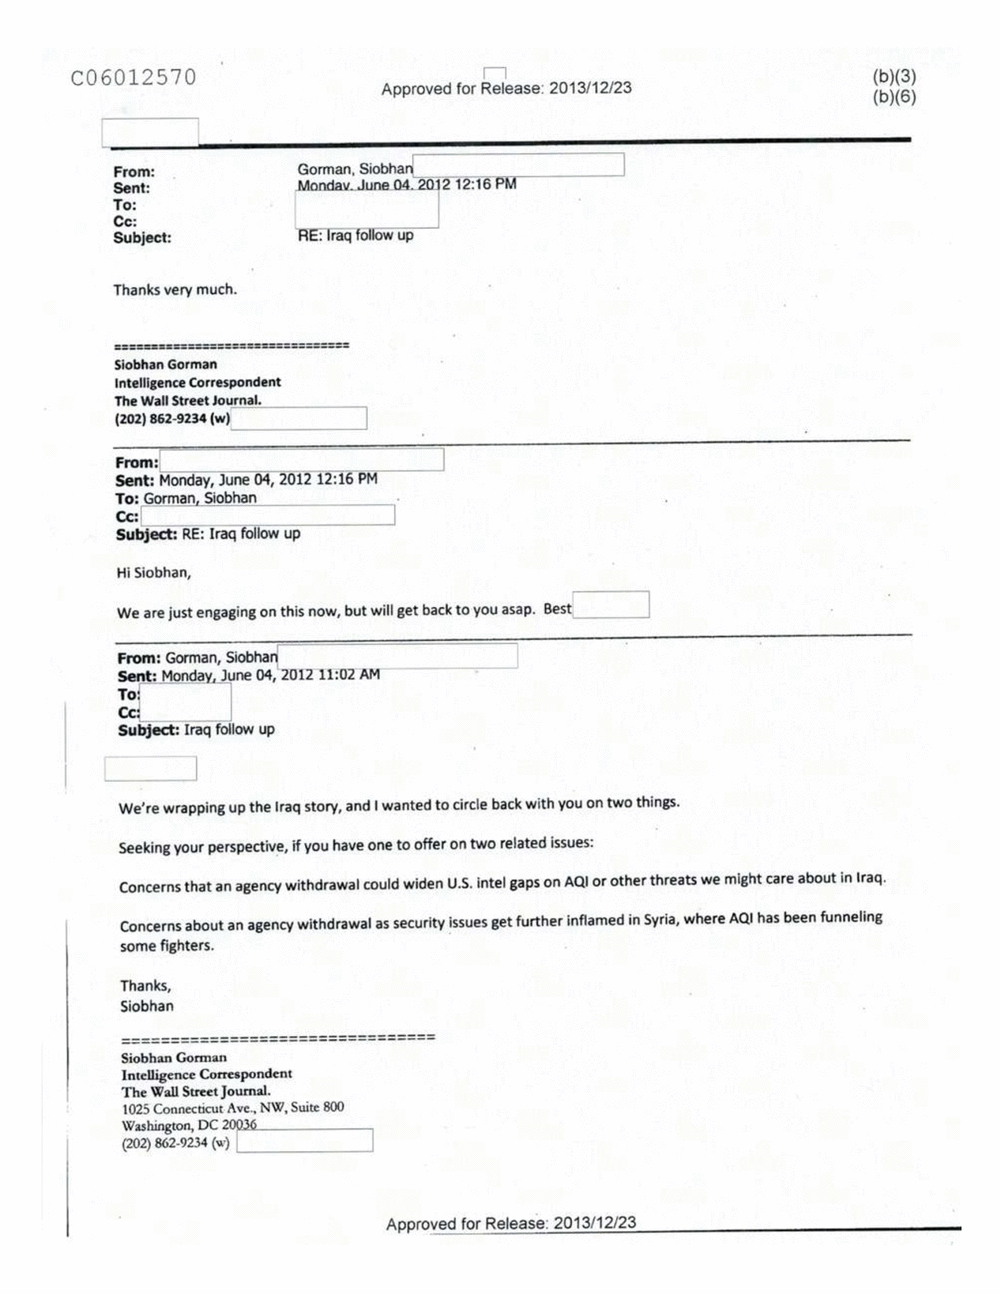 Page 103 from Email Correspondence Between Reporters and CIA Flacks